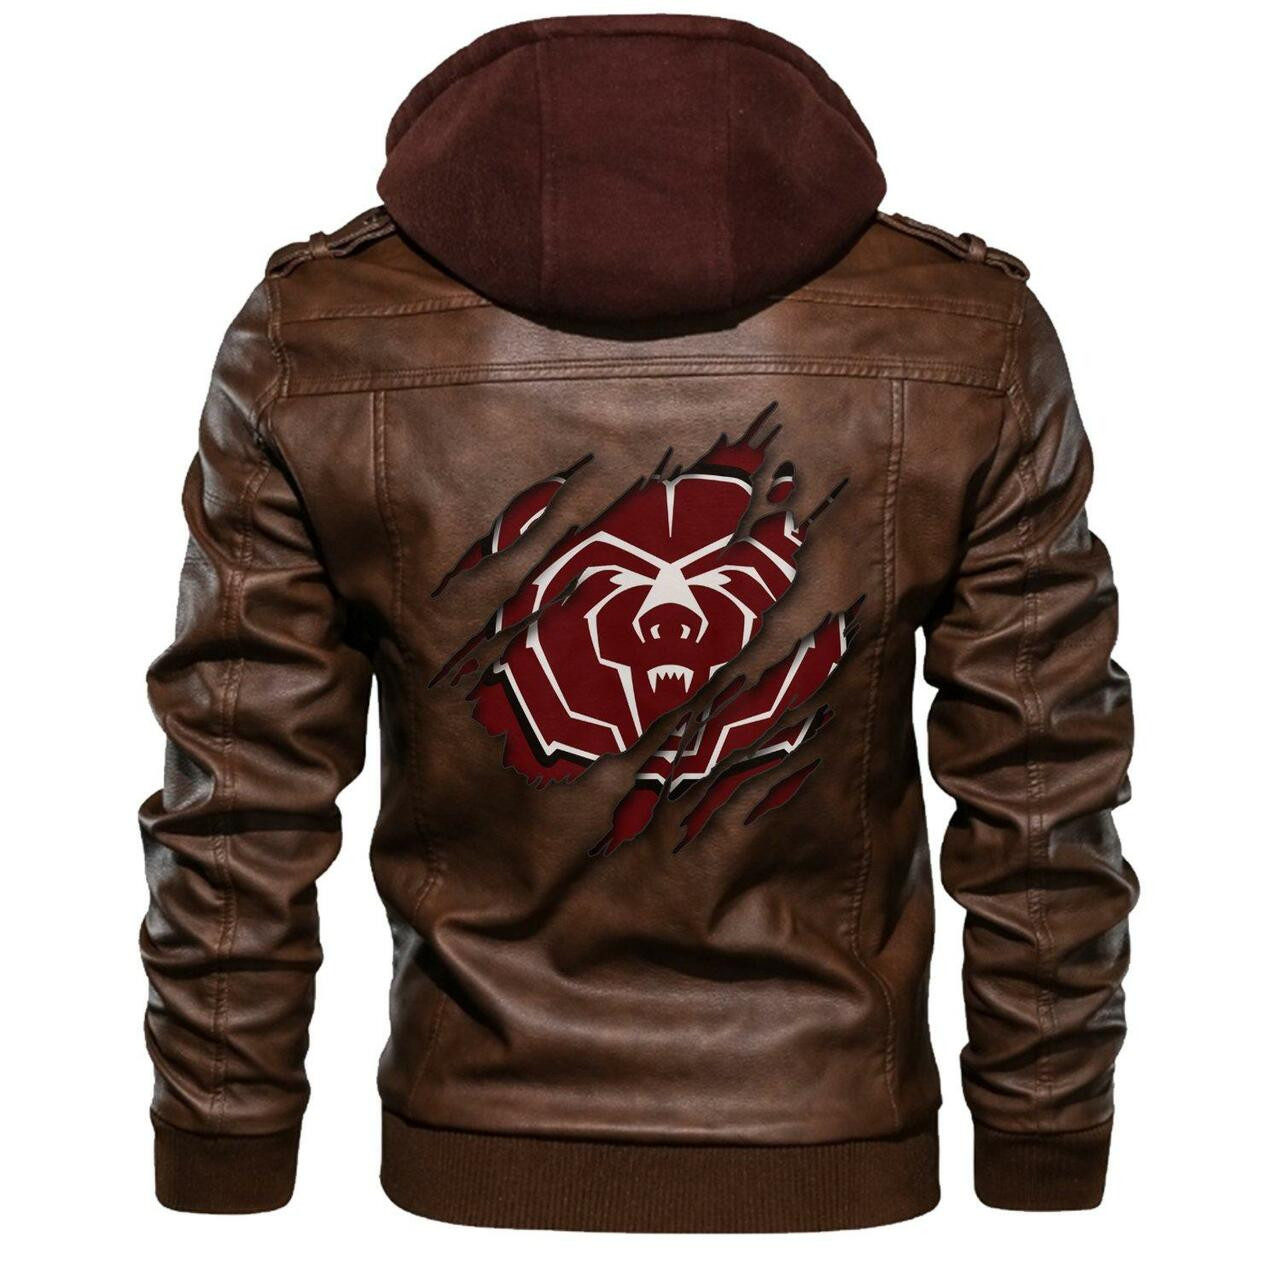 Check out and find the right leather jacket below 106